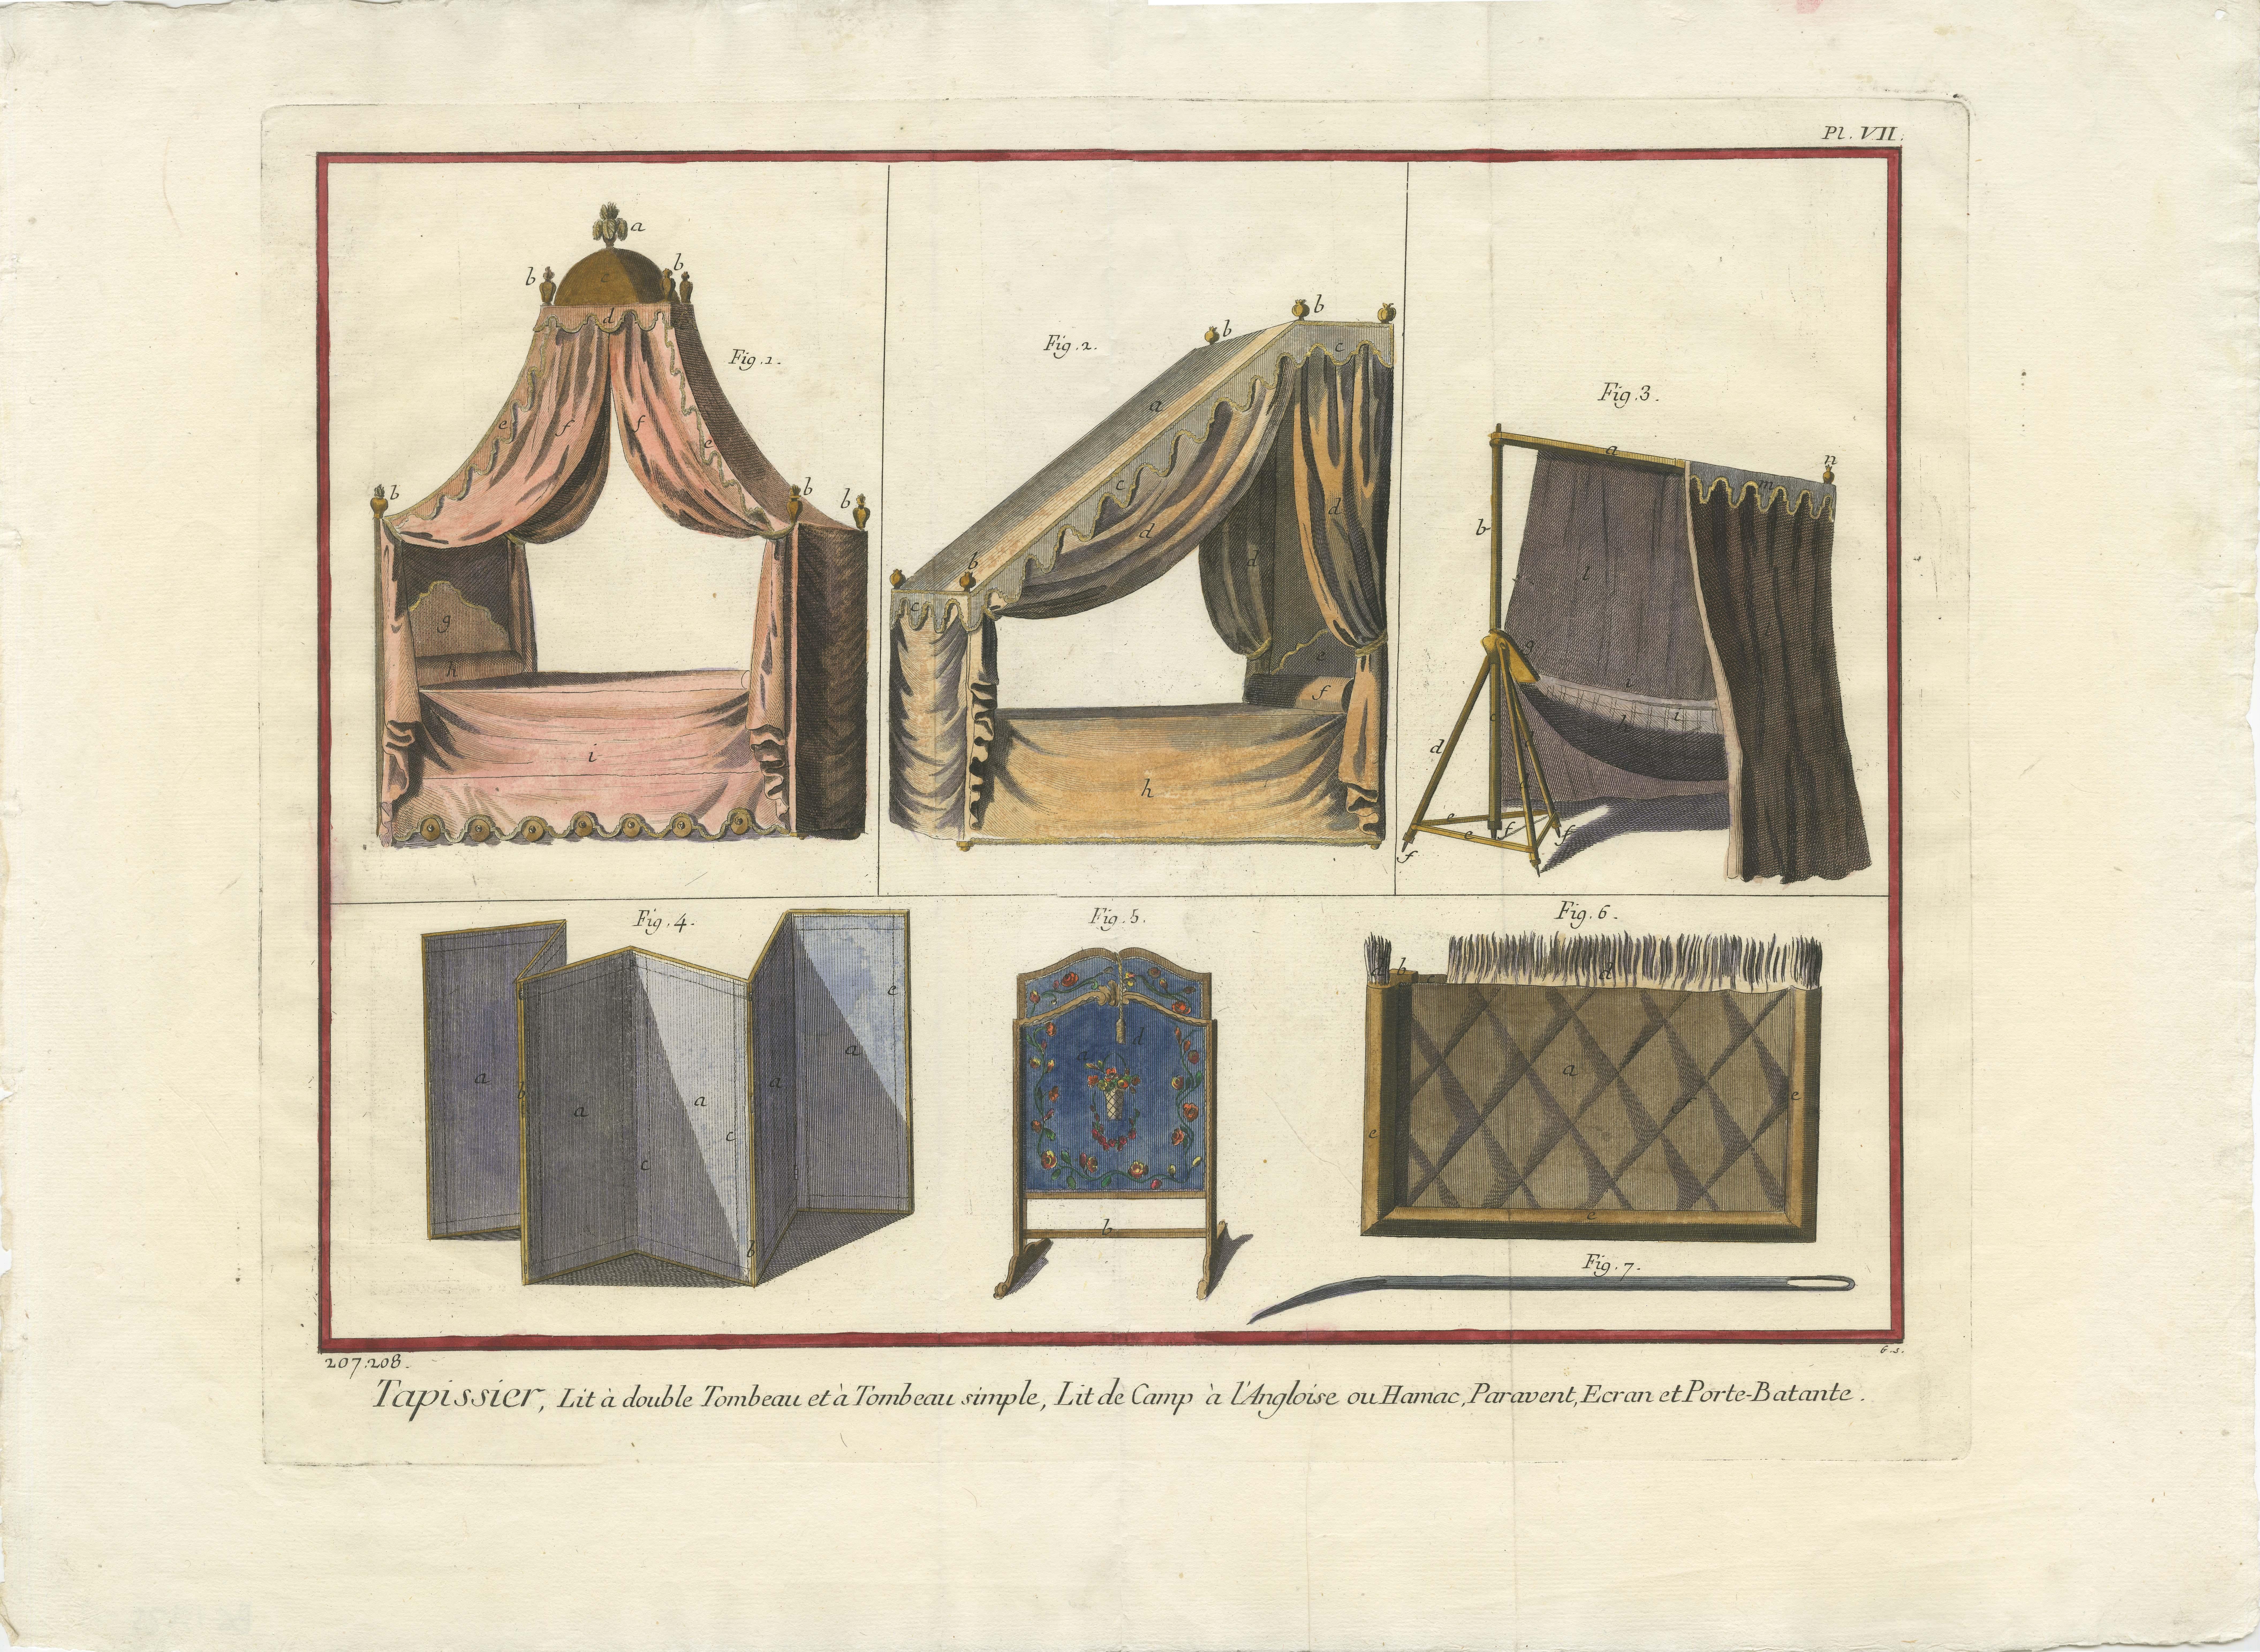 Crafts of Comfort and Style: Upholstery and Furniture Design in the 1760s from Diderot's Encyclopédie

This original hand-colored antique engraving is from the 